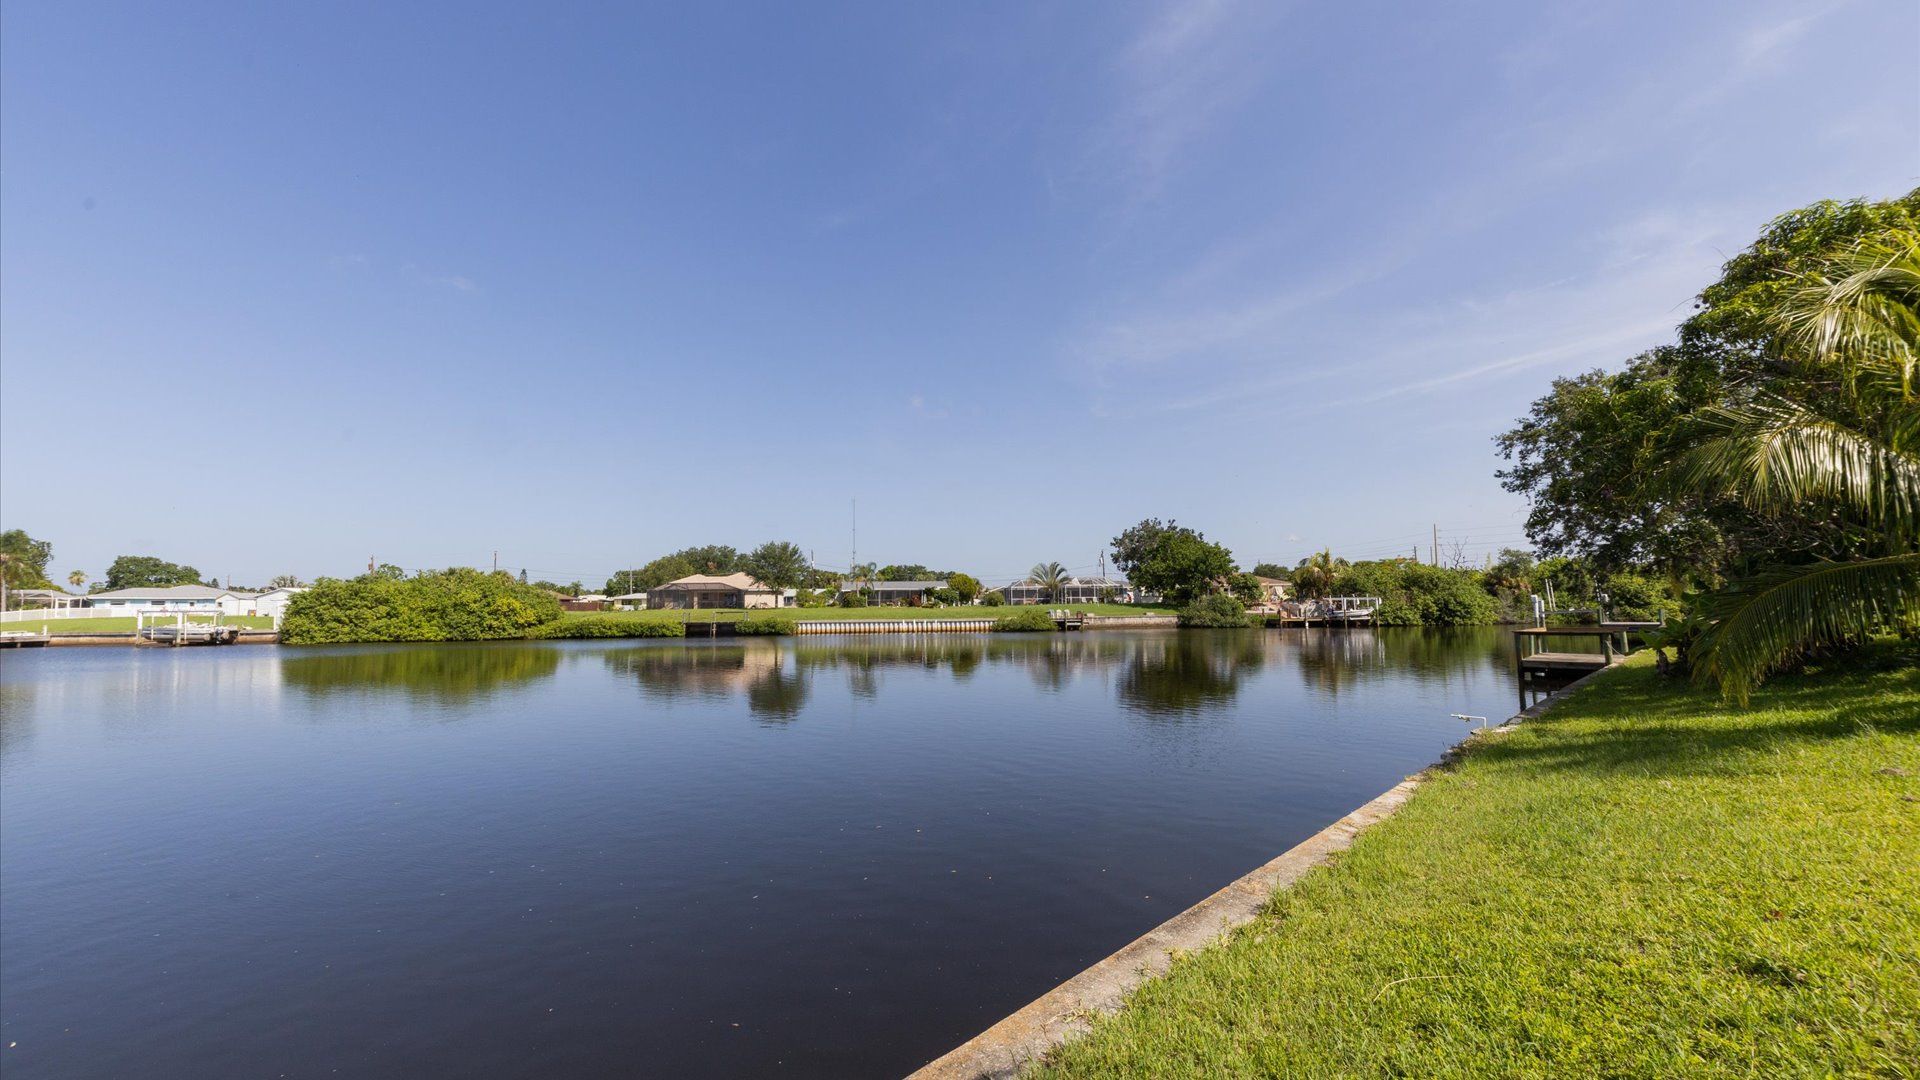 This canal leads to Charlotte Harbor with only the Edgewater bridge for clearance